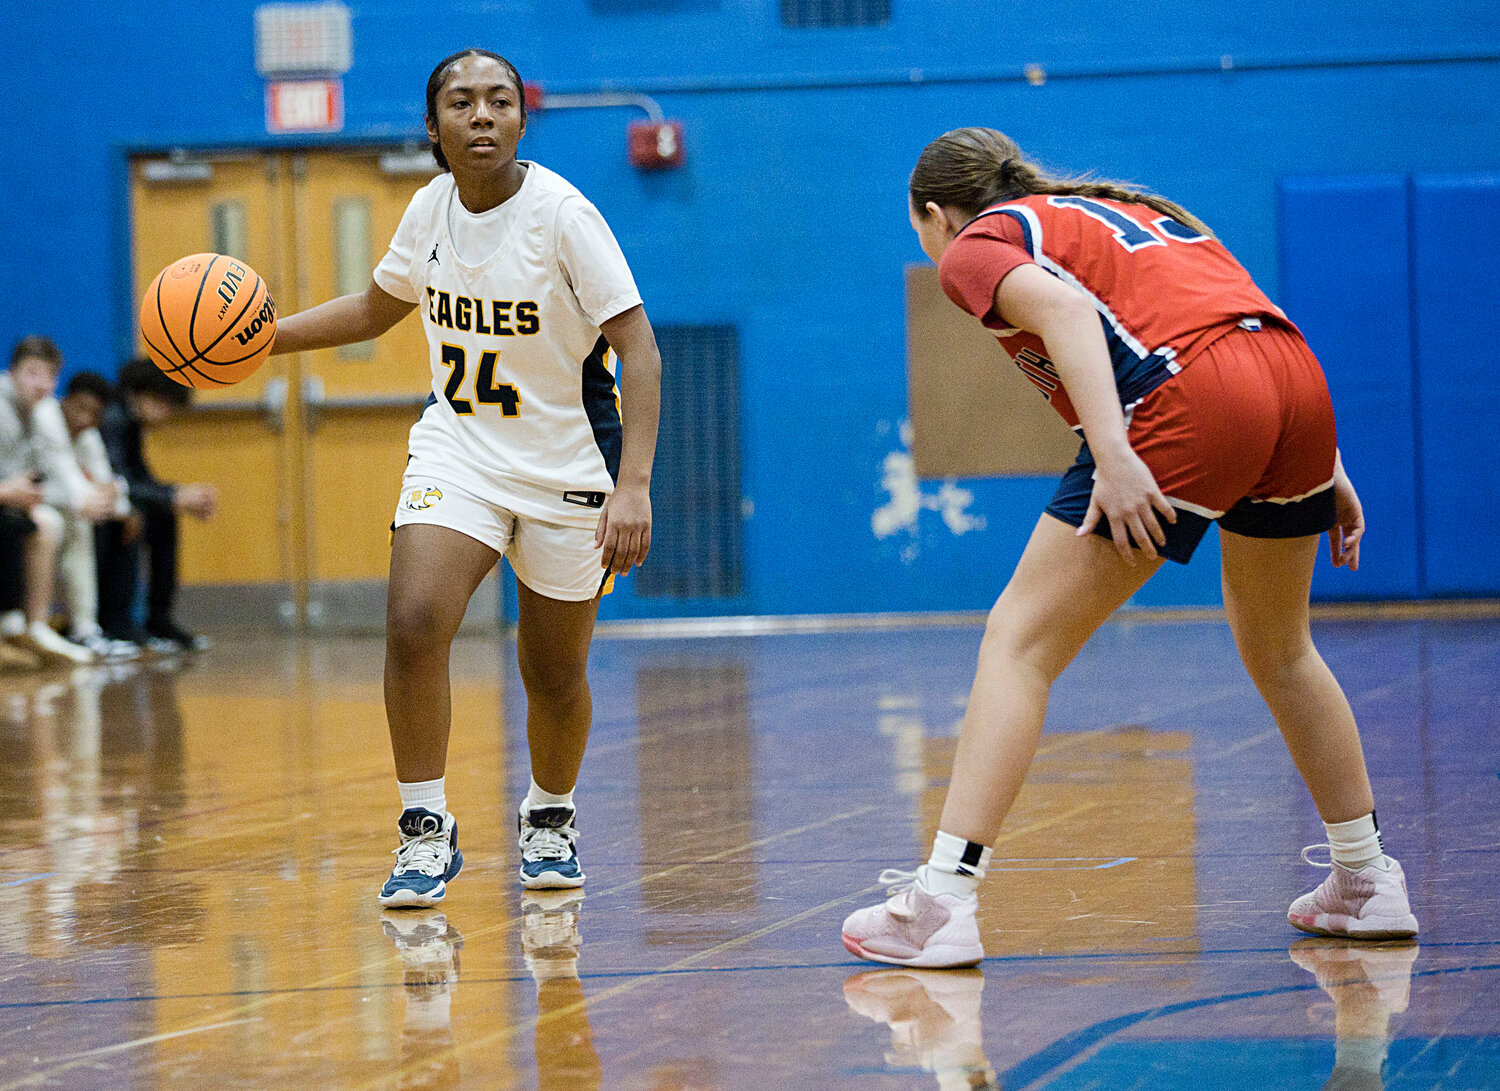 Barrington's Janaya Prince Baquero (left), shown during a home game earlier this season, led the Eagles with 17 points in a double overtime win against North Kingstown.